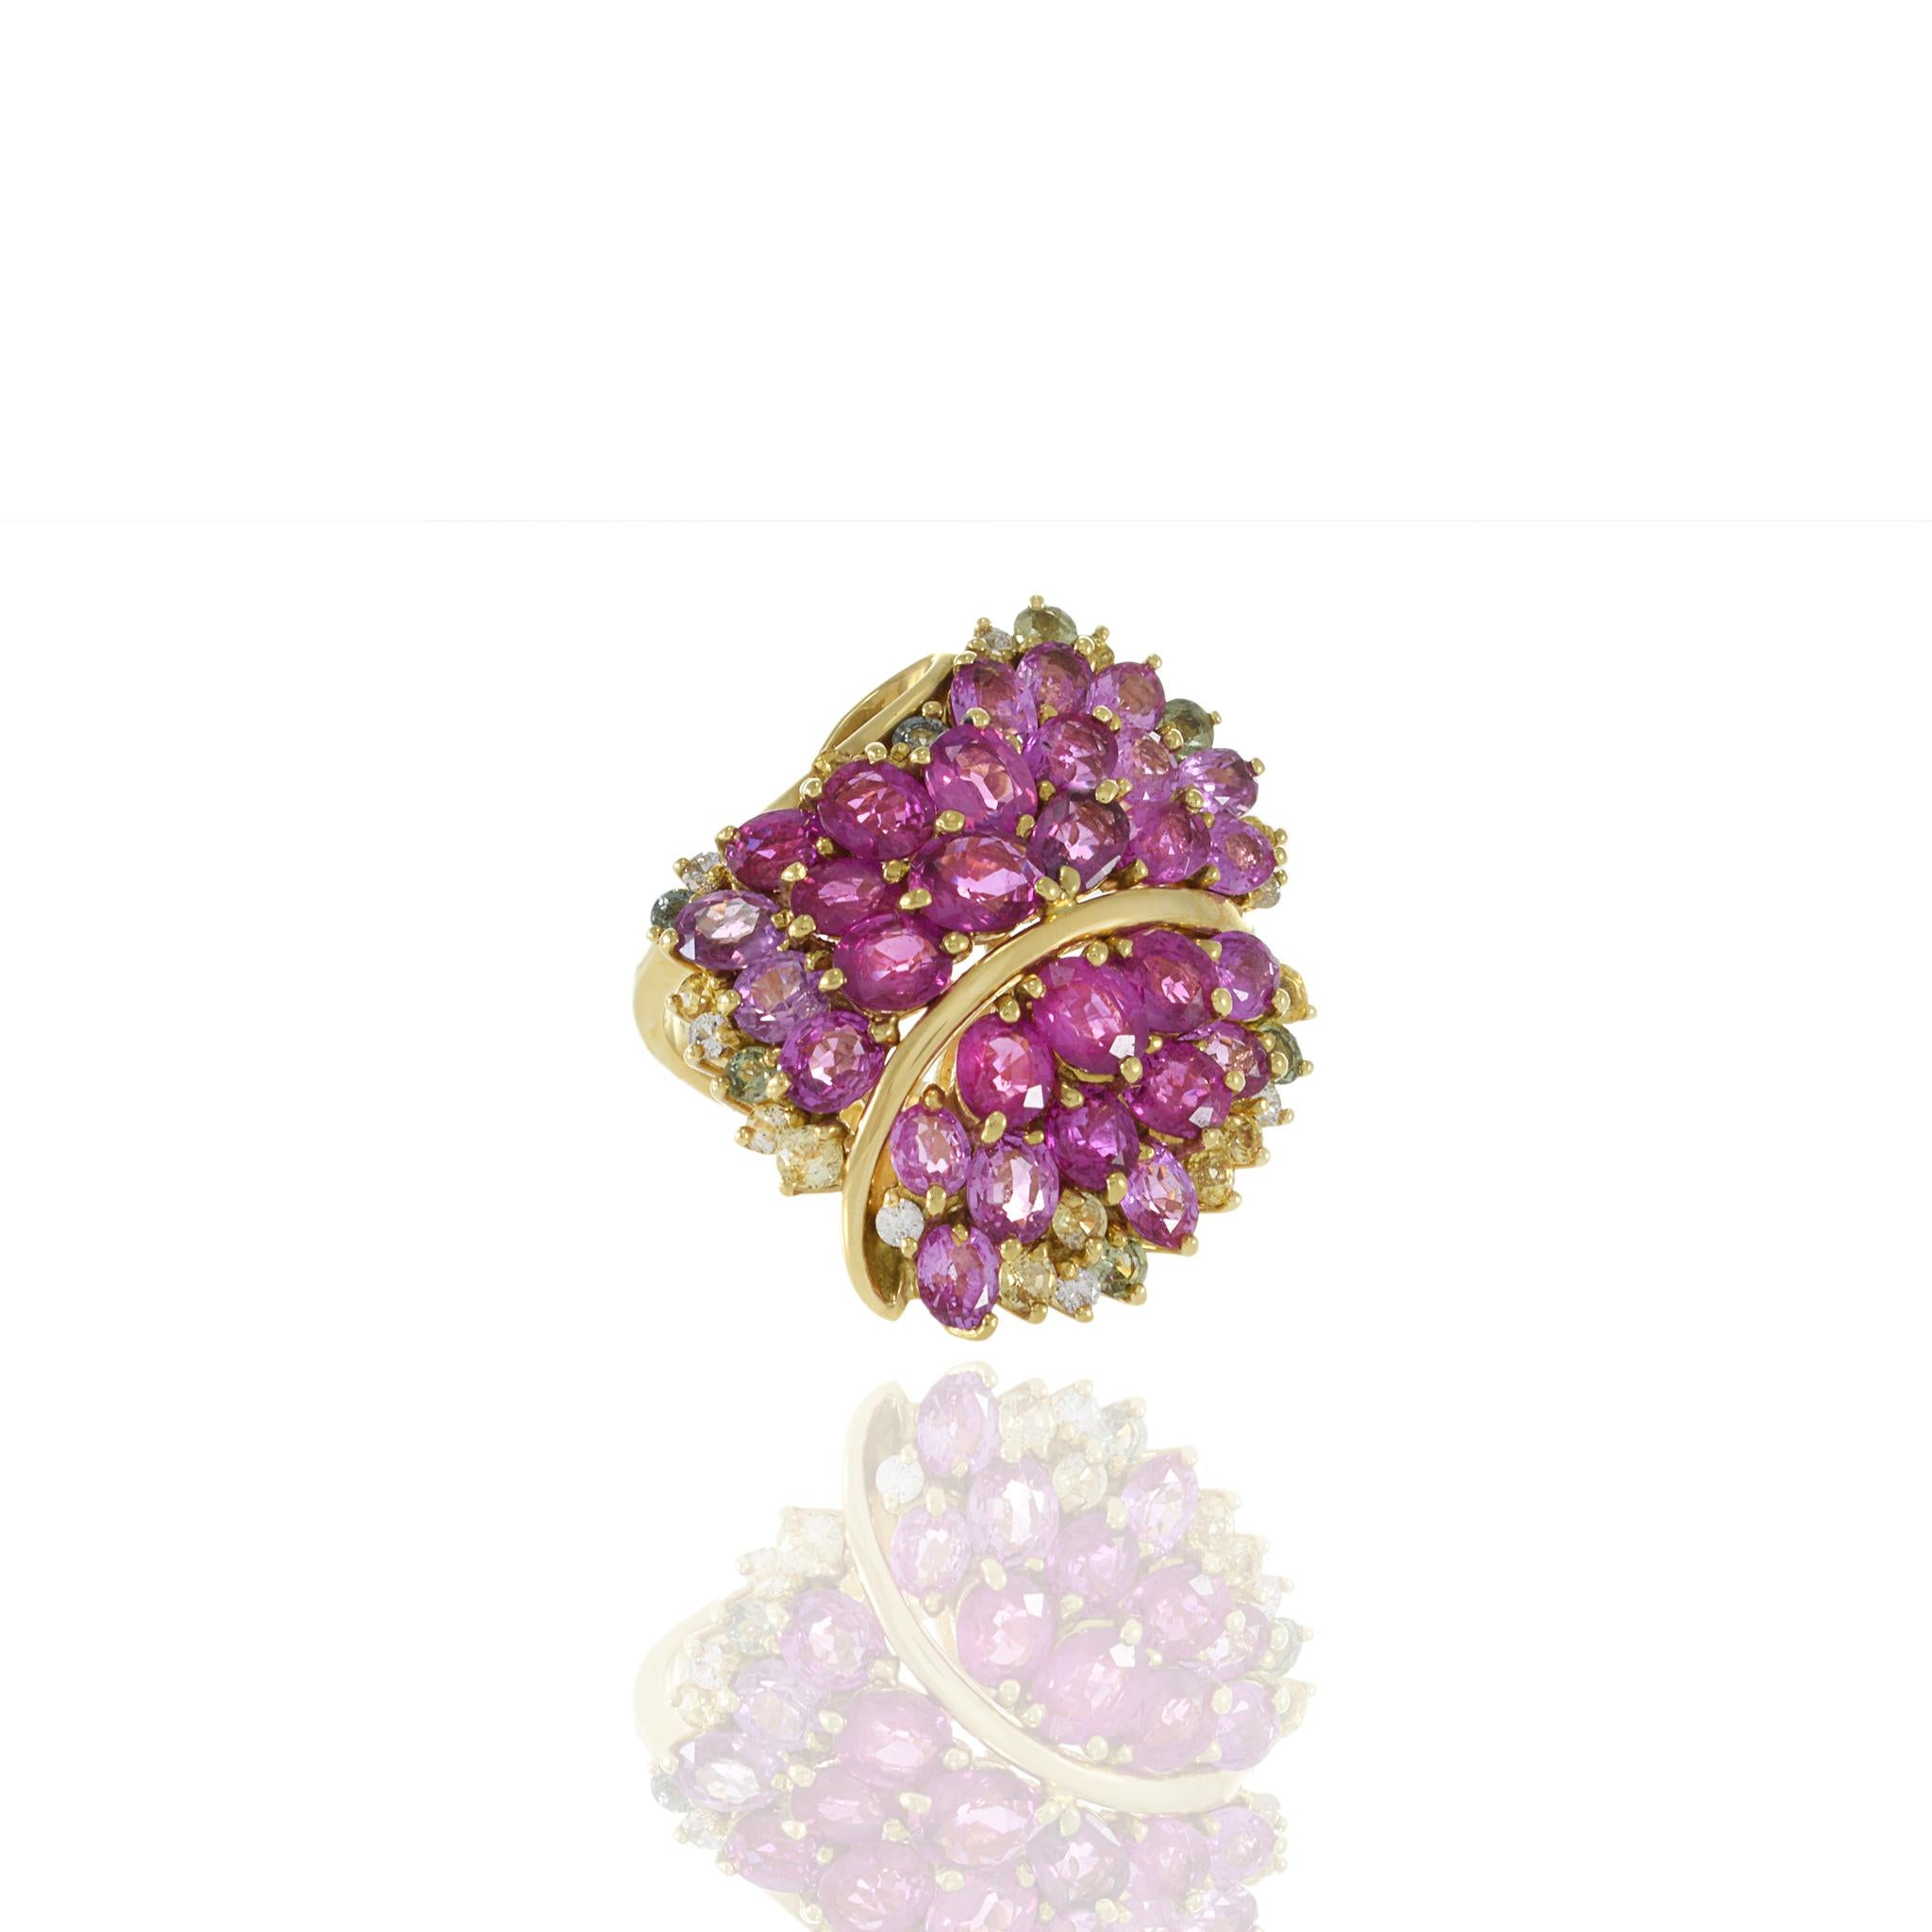 The Estate 18KT Yellow Gold Pink/ Green Sapphire and Diamond Cluster Cocktail Ring is an embodiment of luxurious elegance and vibrant beauty. This magnificent ring showcases a breathtaking array of round cut genuine pink and green sapphires,